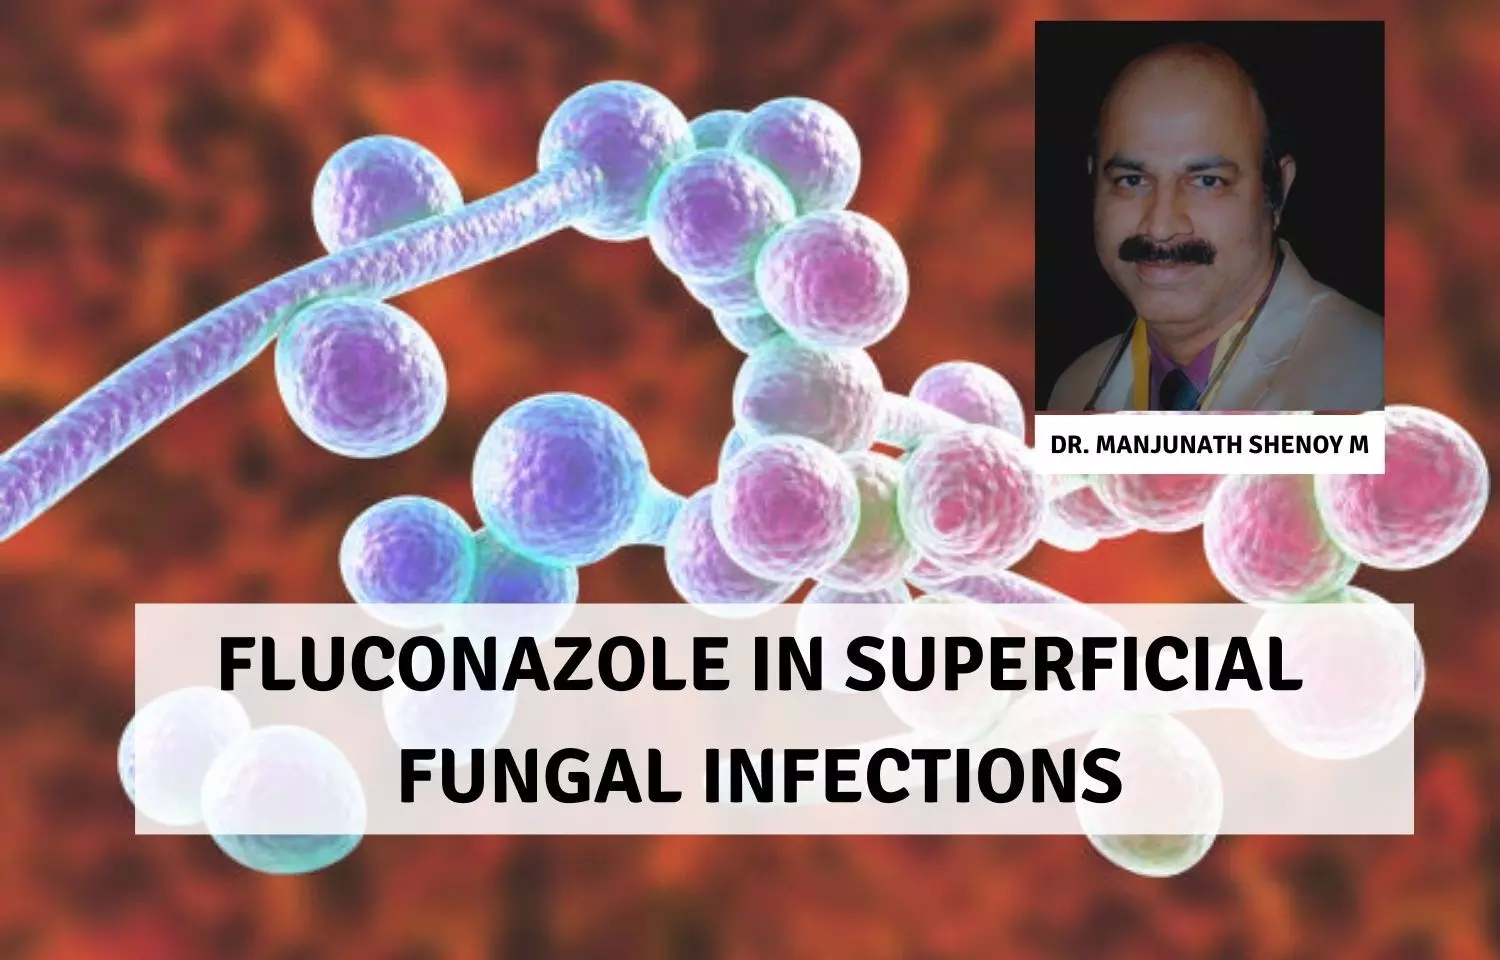 Role of Fluconazole in Superficial Fungal Infections